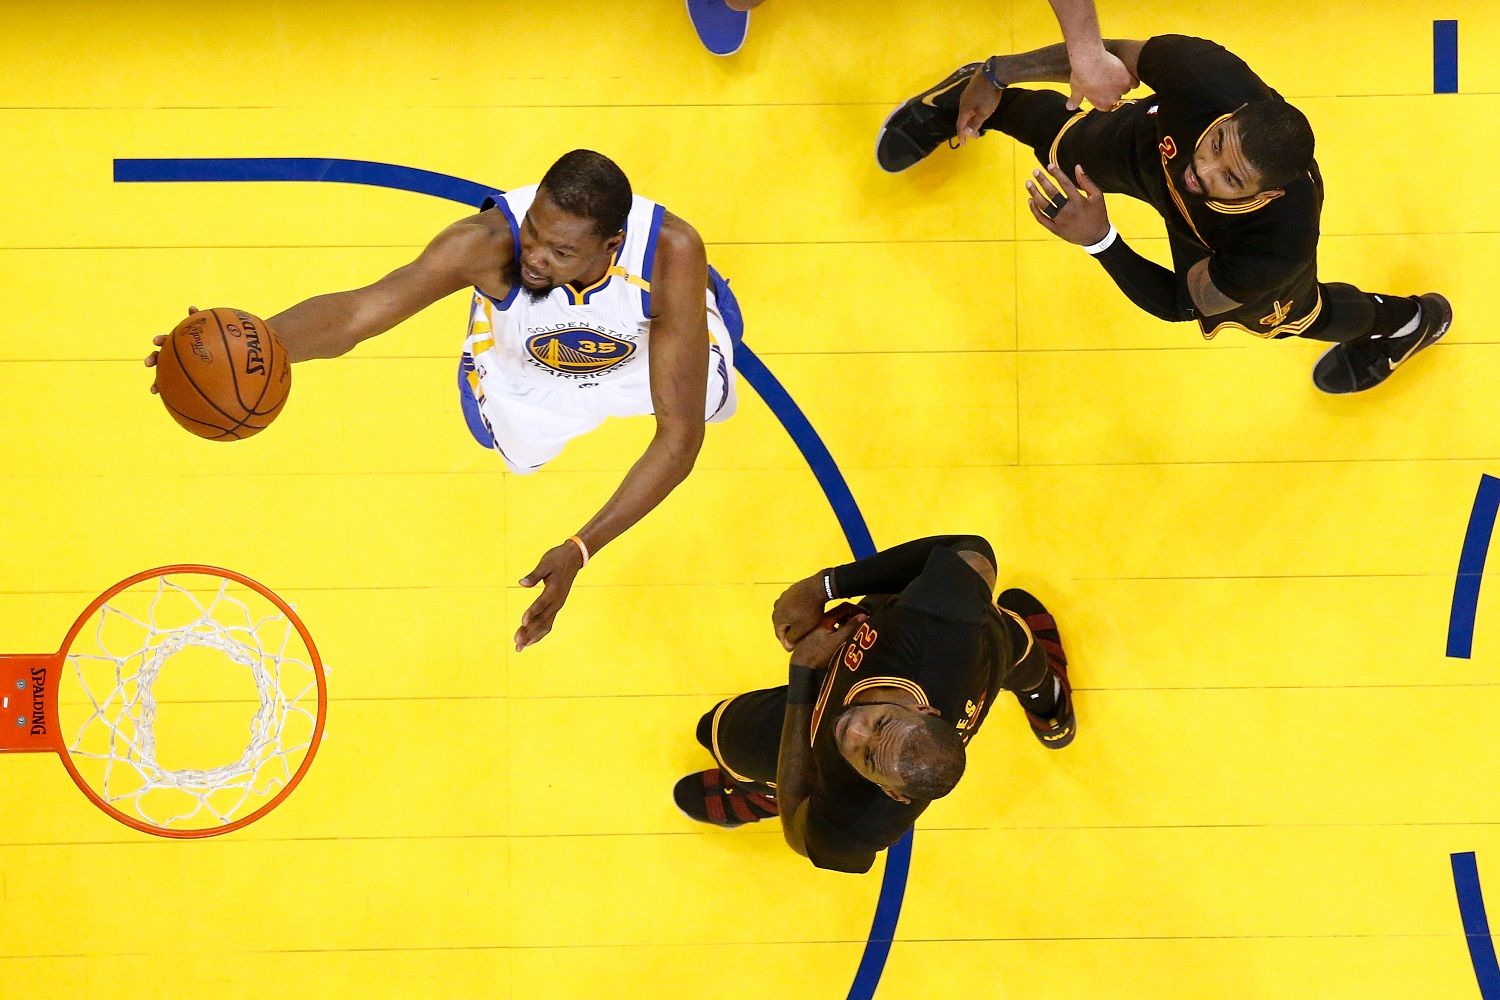 OAKLAND, CA - JUNE 12:  Kevin Durant #35 of the Golden State Warriors goes up for a shot against the Cleveland Cavaliers in Game 5 of the 2017 NBA Finals at ORACLE Arena on June 12, 2017 in Oakland, California. NOTE TO USER: User expressly acknowledges and agrees that, by downloading and or using this photograph, User is consenting to the terms and conditions of the Getty Images License Agreement.  (Photo by Monica Davey/Pool/Getty Images)